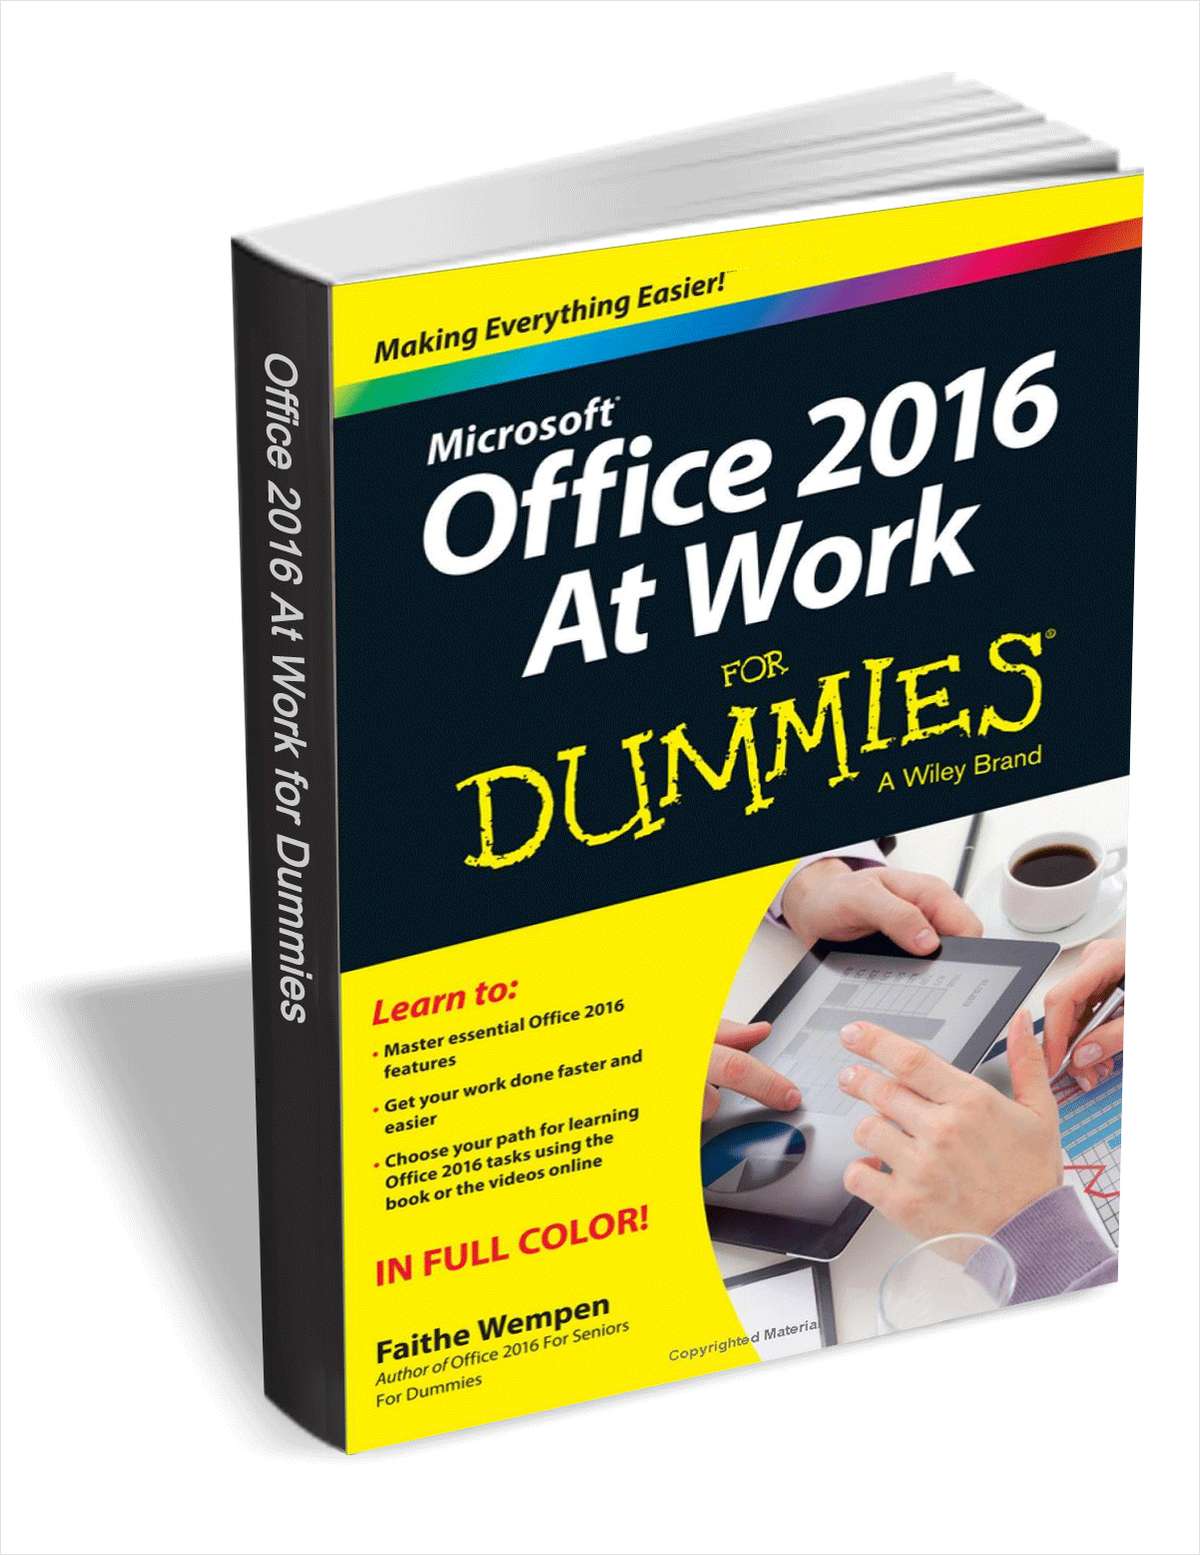 Office 2016 at Work For Dummies ($20 Value) FREE For a Limited Time